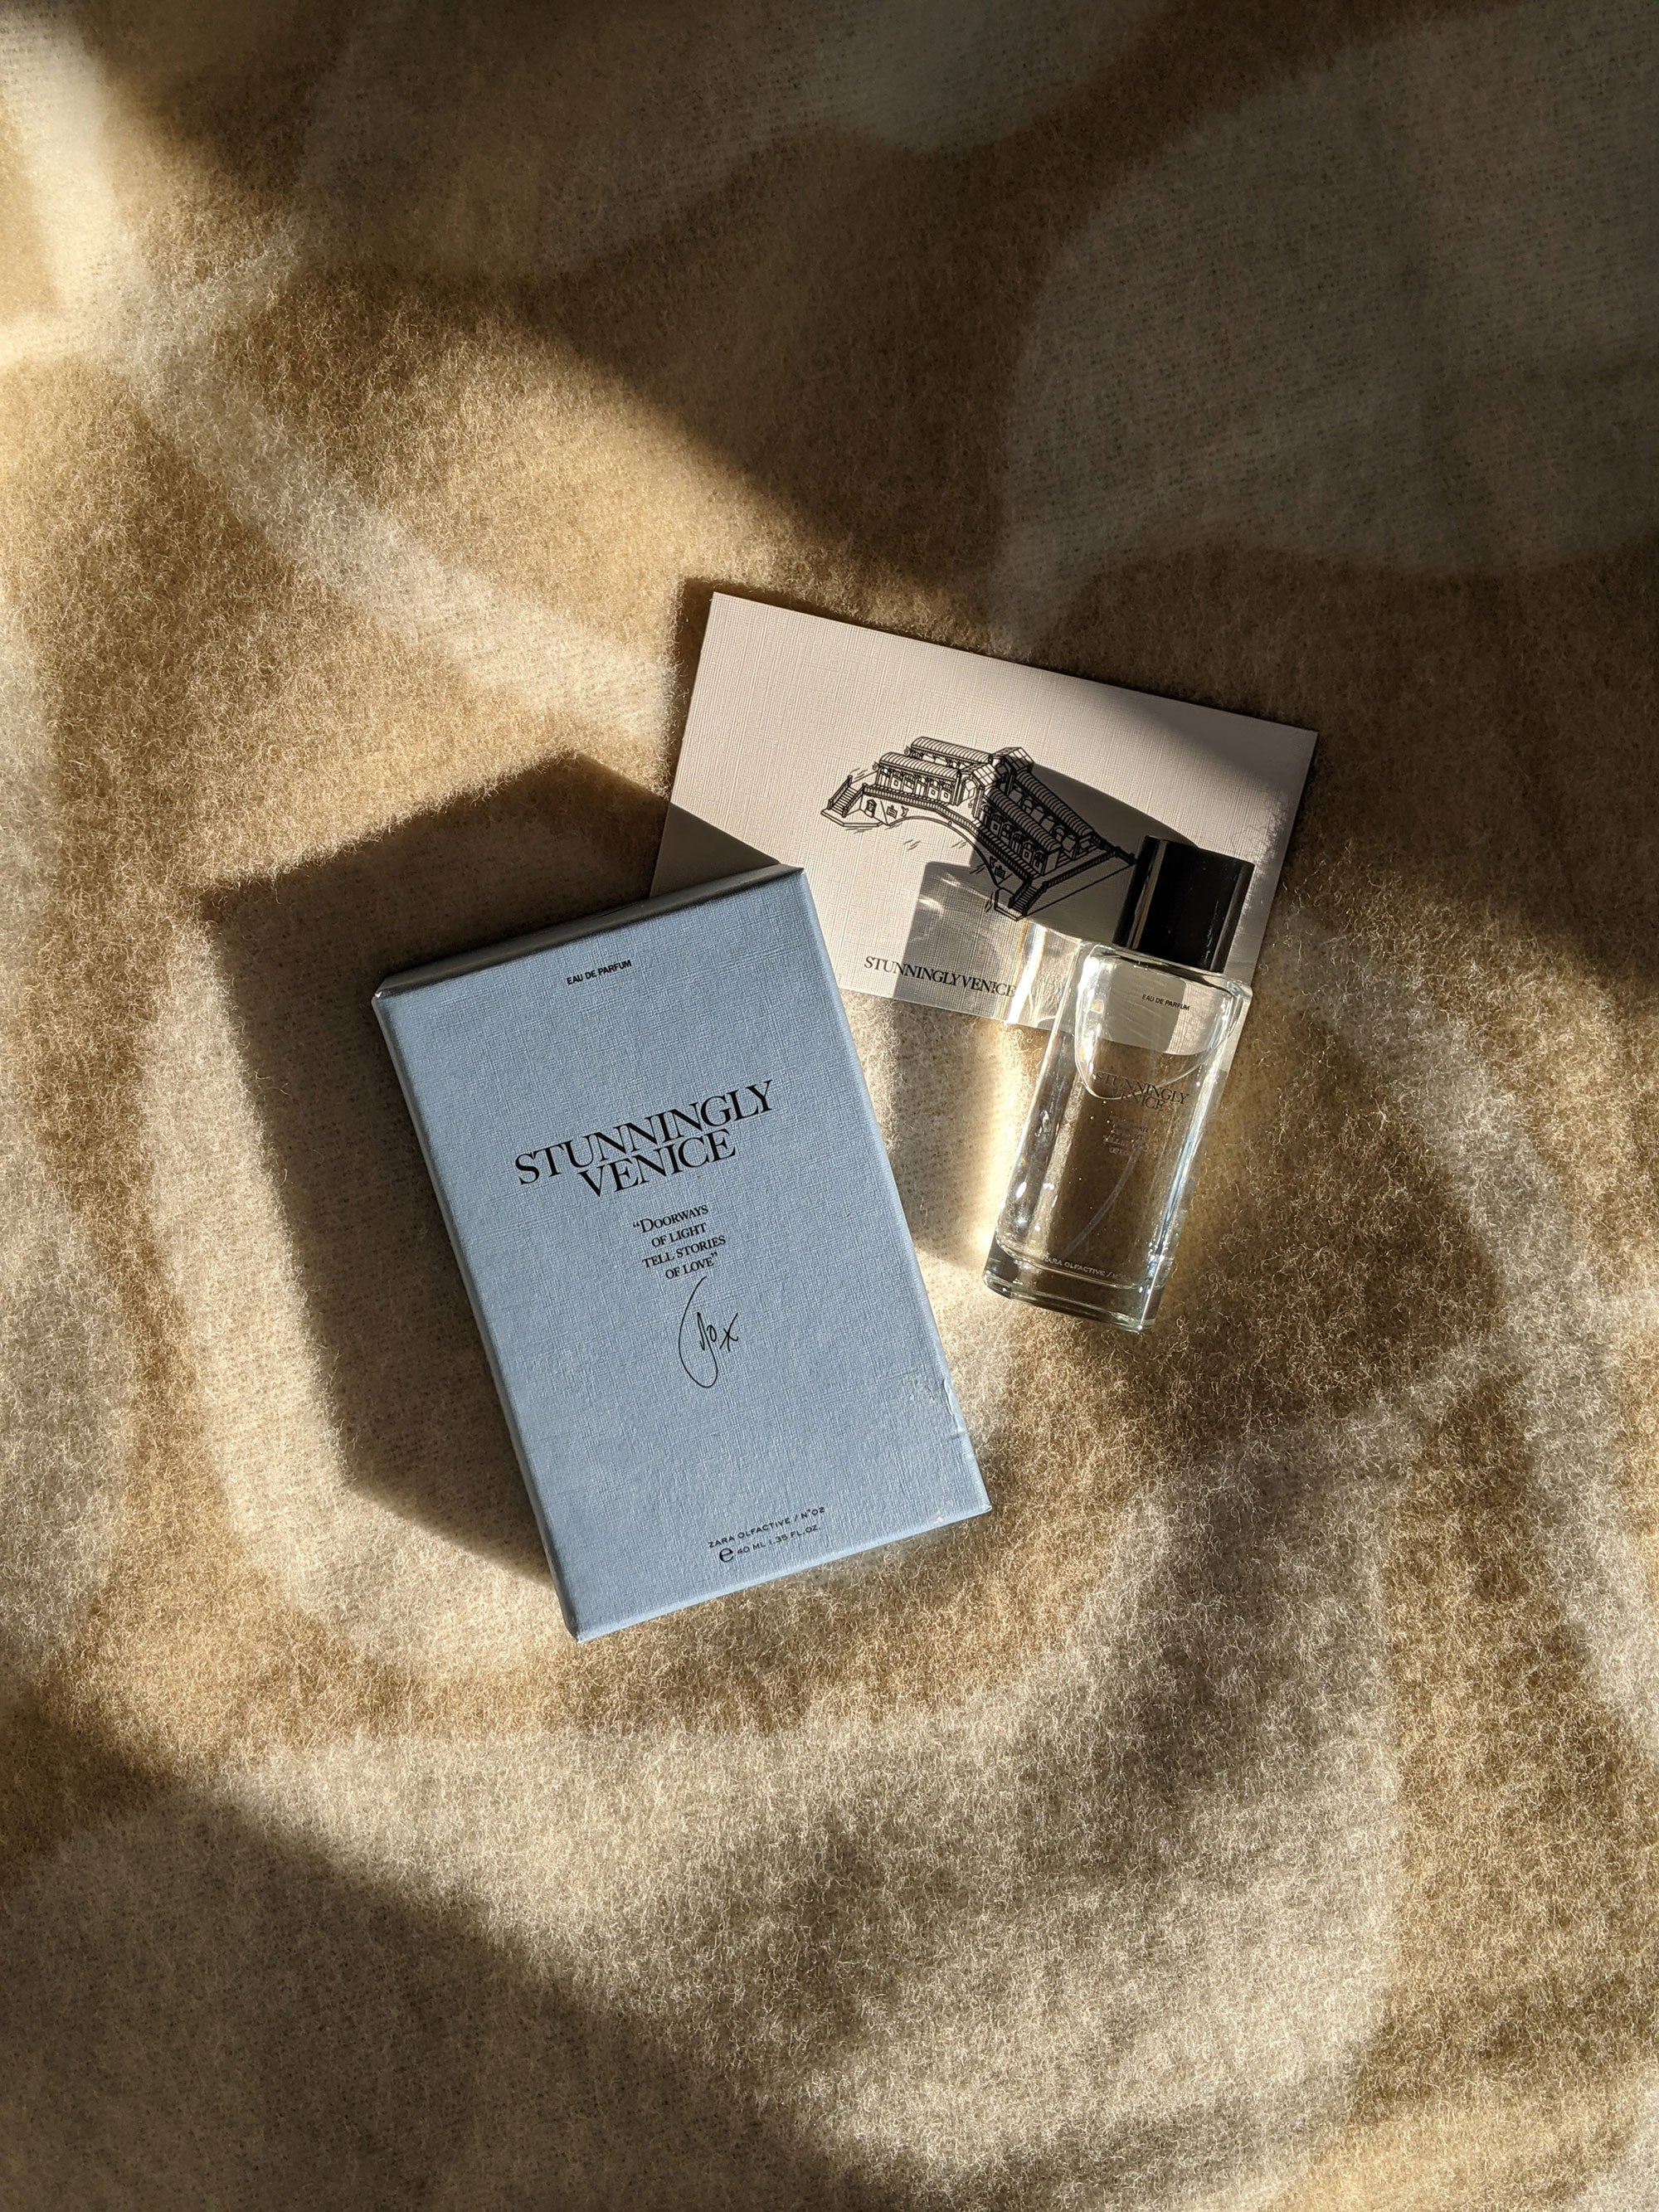 I'm a perfume expert and Zara has a dupe for pretty much every popular scent  - here's what I recommend